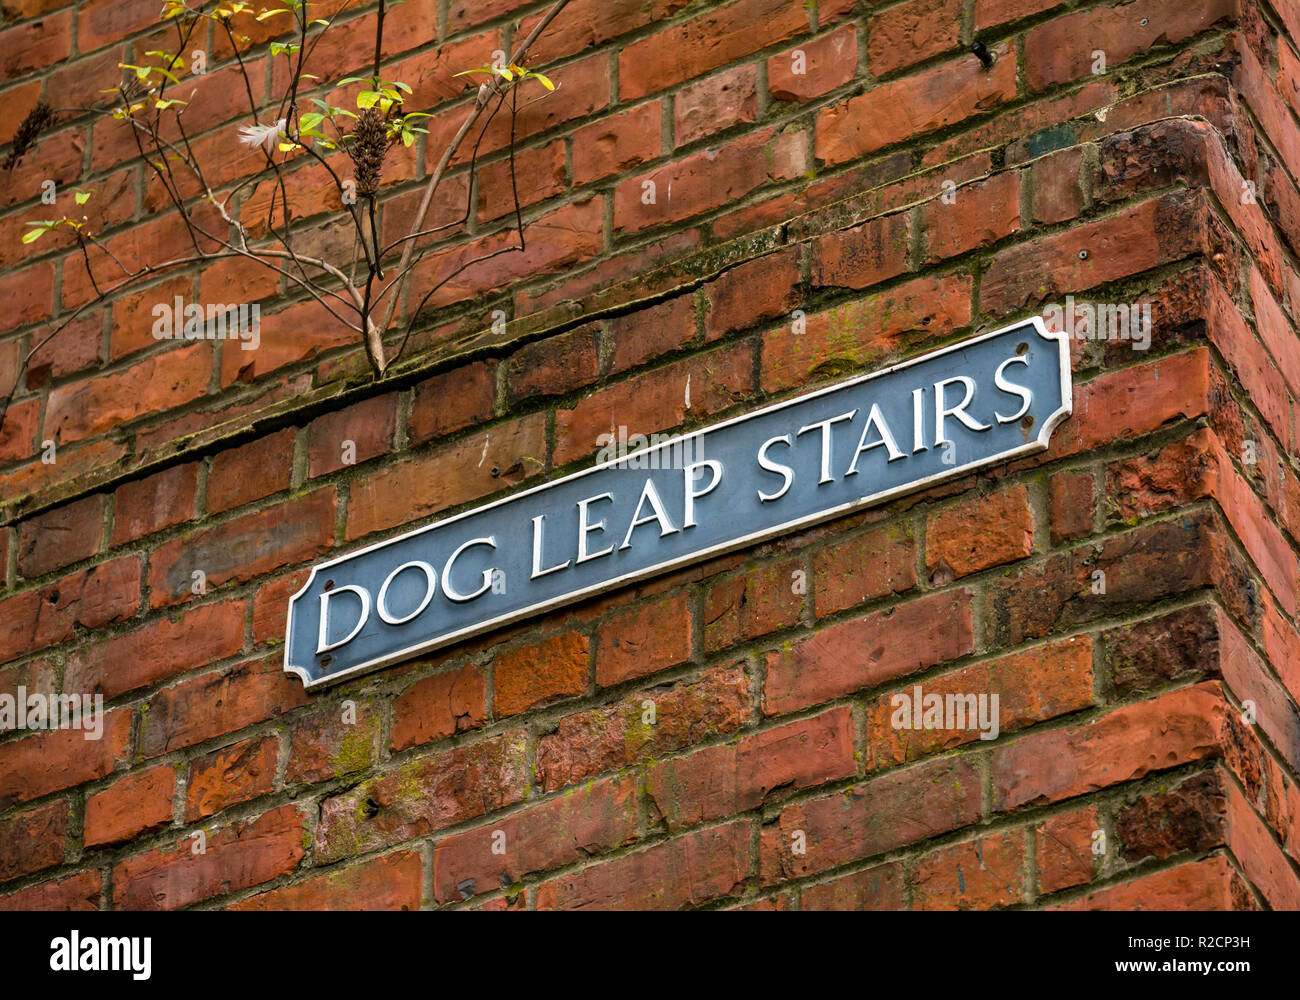 Street sign, Dog Leap Stairs on overgrown neglected old brick wall, Newcastle Upon Tyne, England, UK Stock Photo